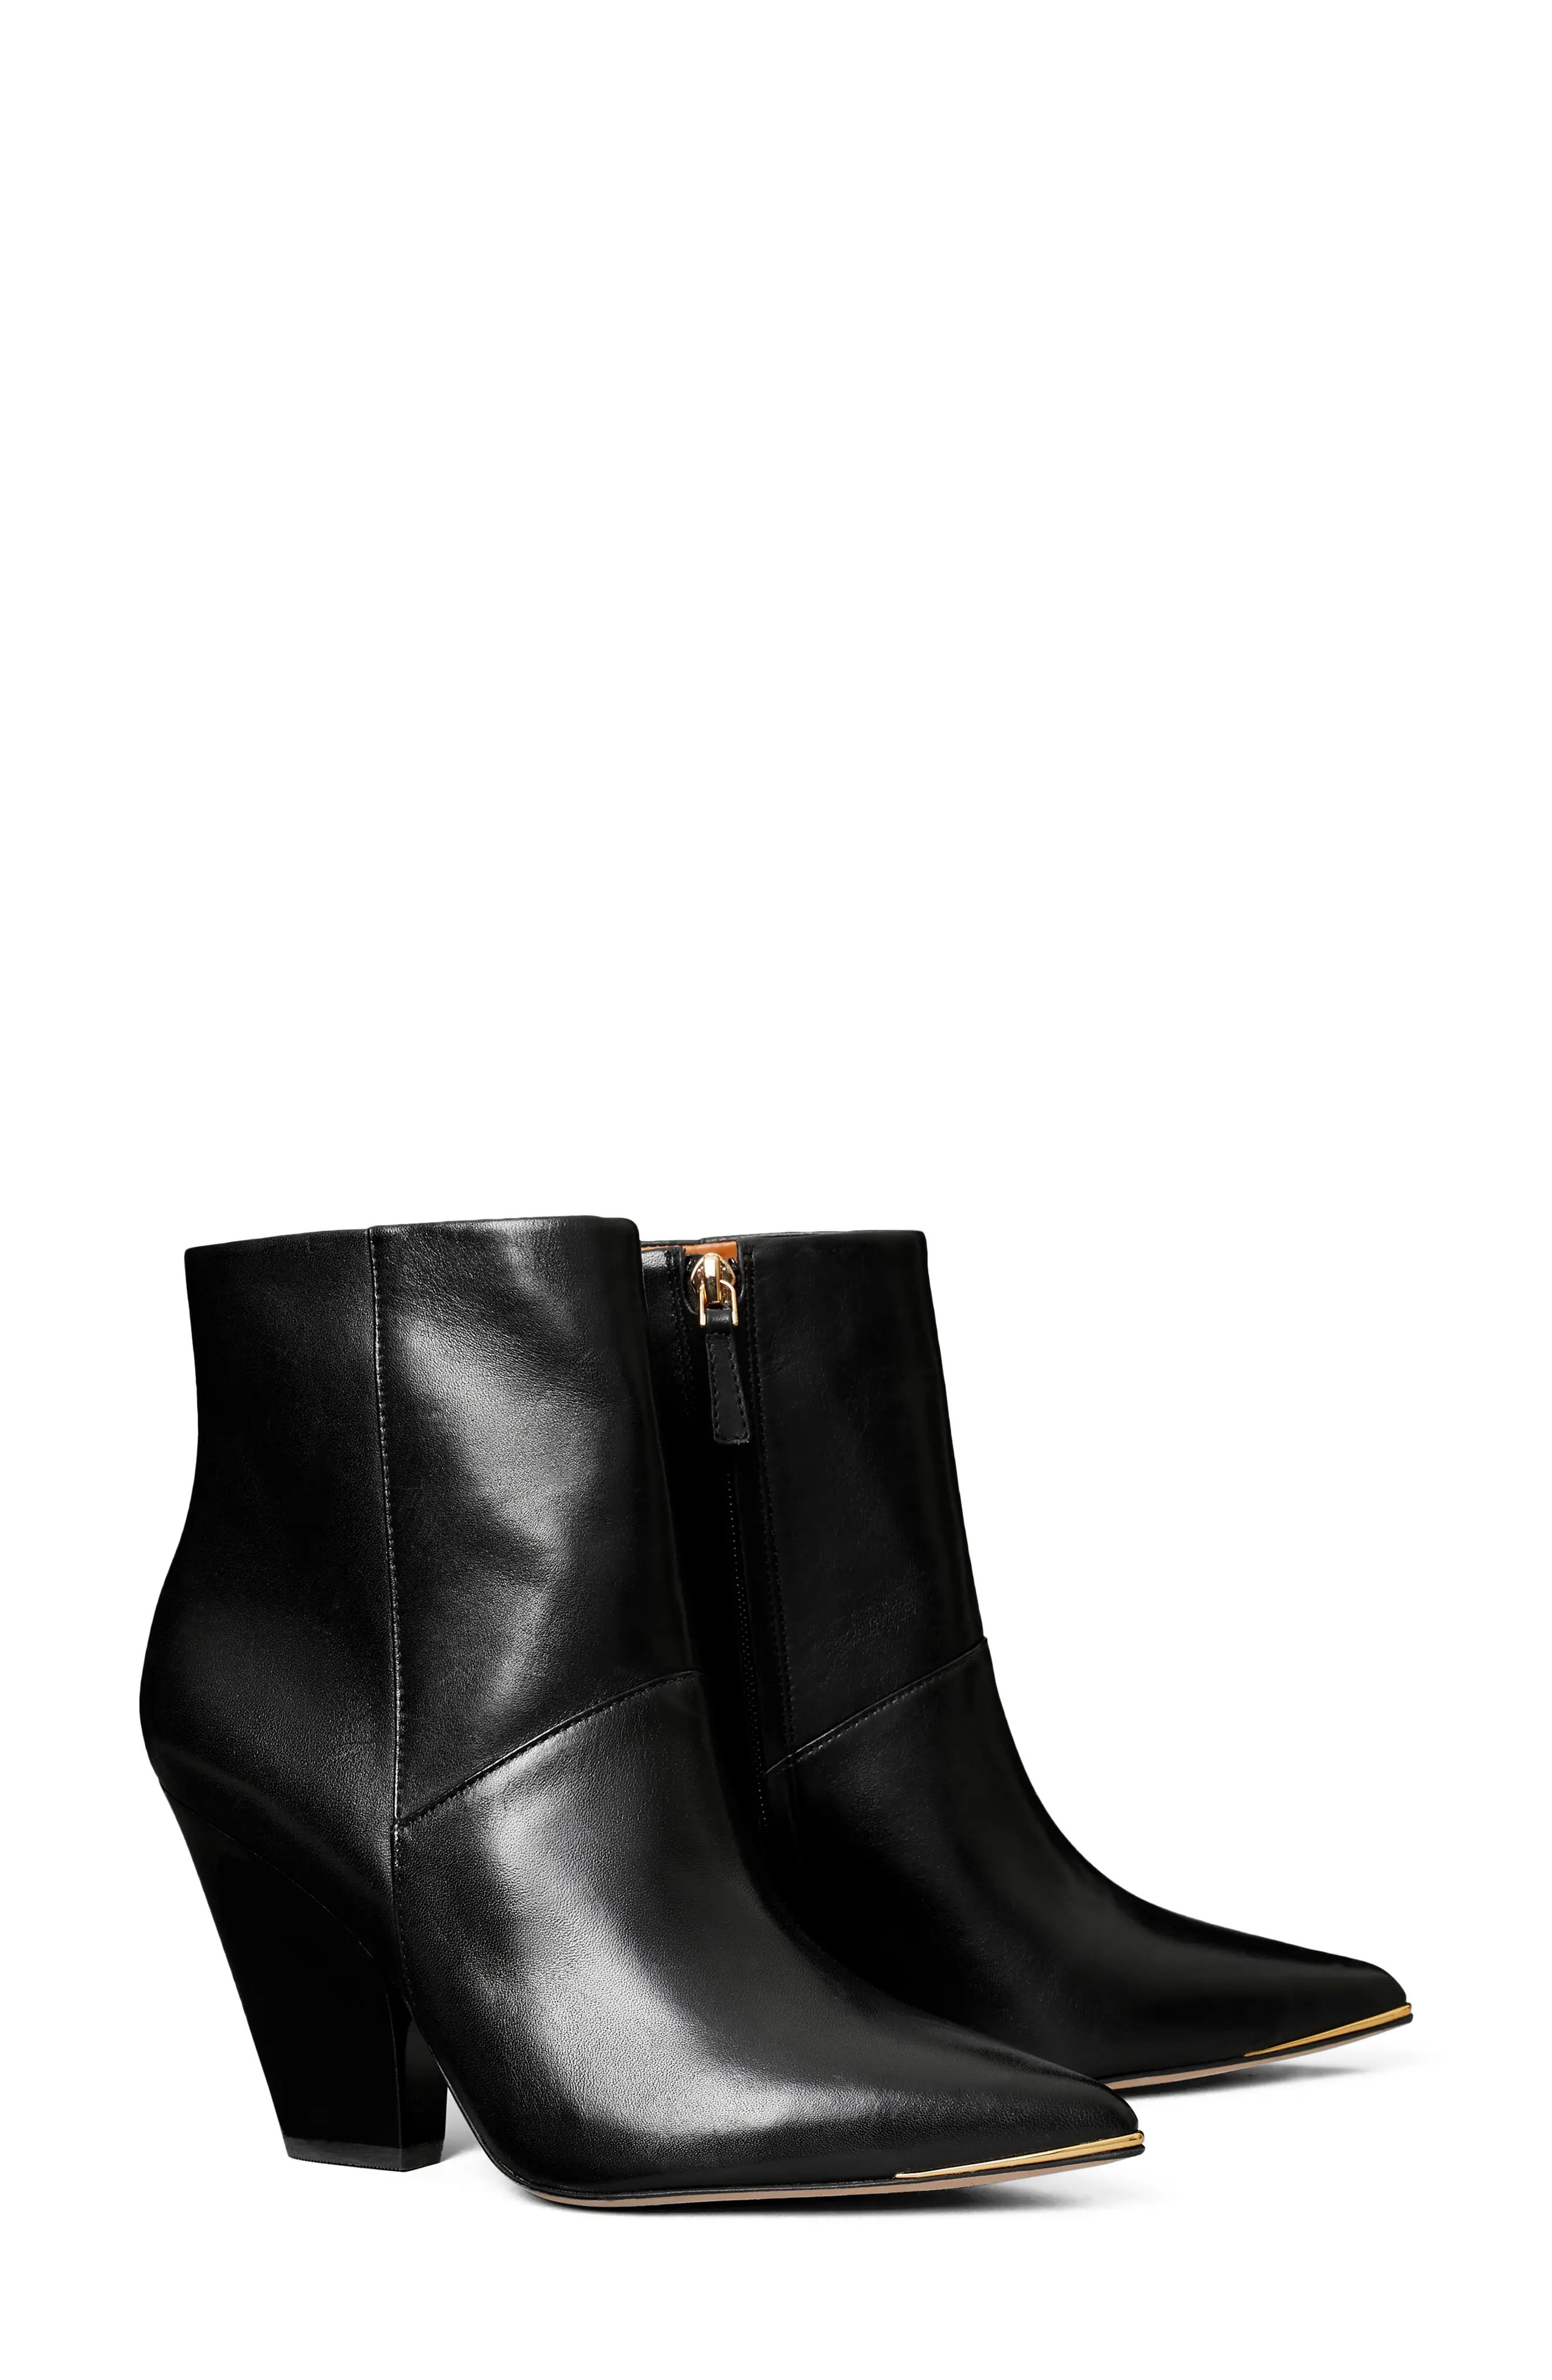 Tory Burch Lila Pointed Toe Bootie in Perfect Black at Nordstrom, Size 7 | Nordstrom